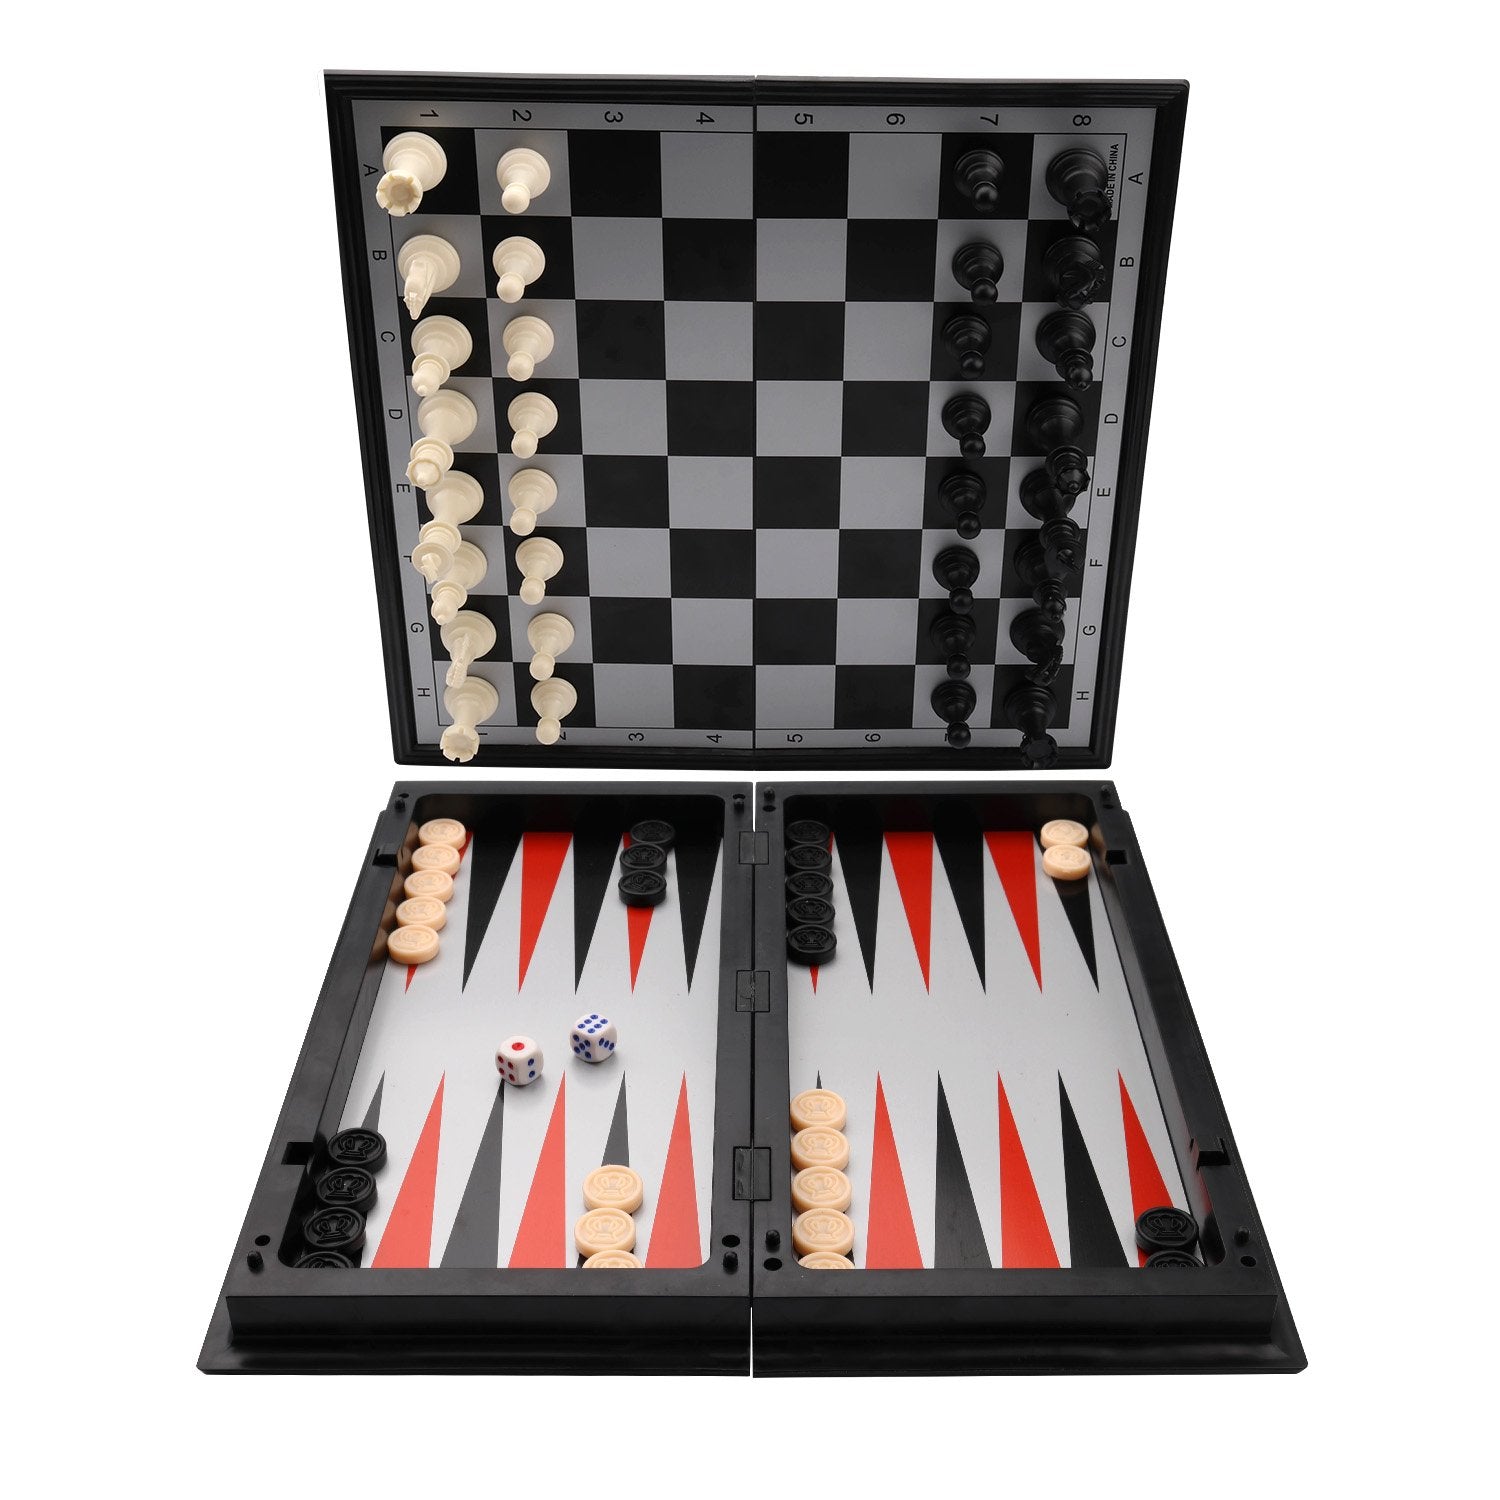 3 in 1 Chess Checkers Backgammon Set, KAILE Magnetic Chess Travel Magnet Chess with Folding Case 13"